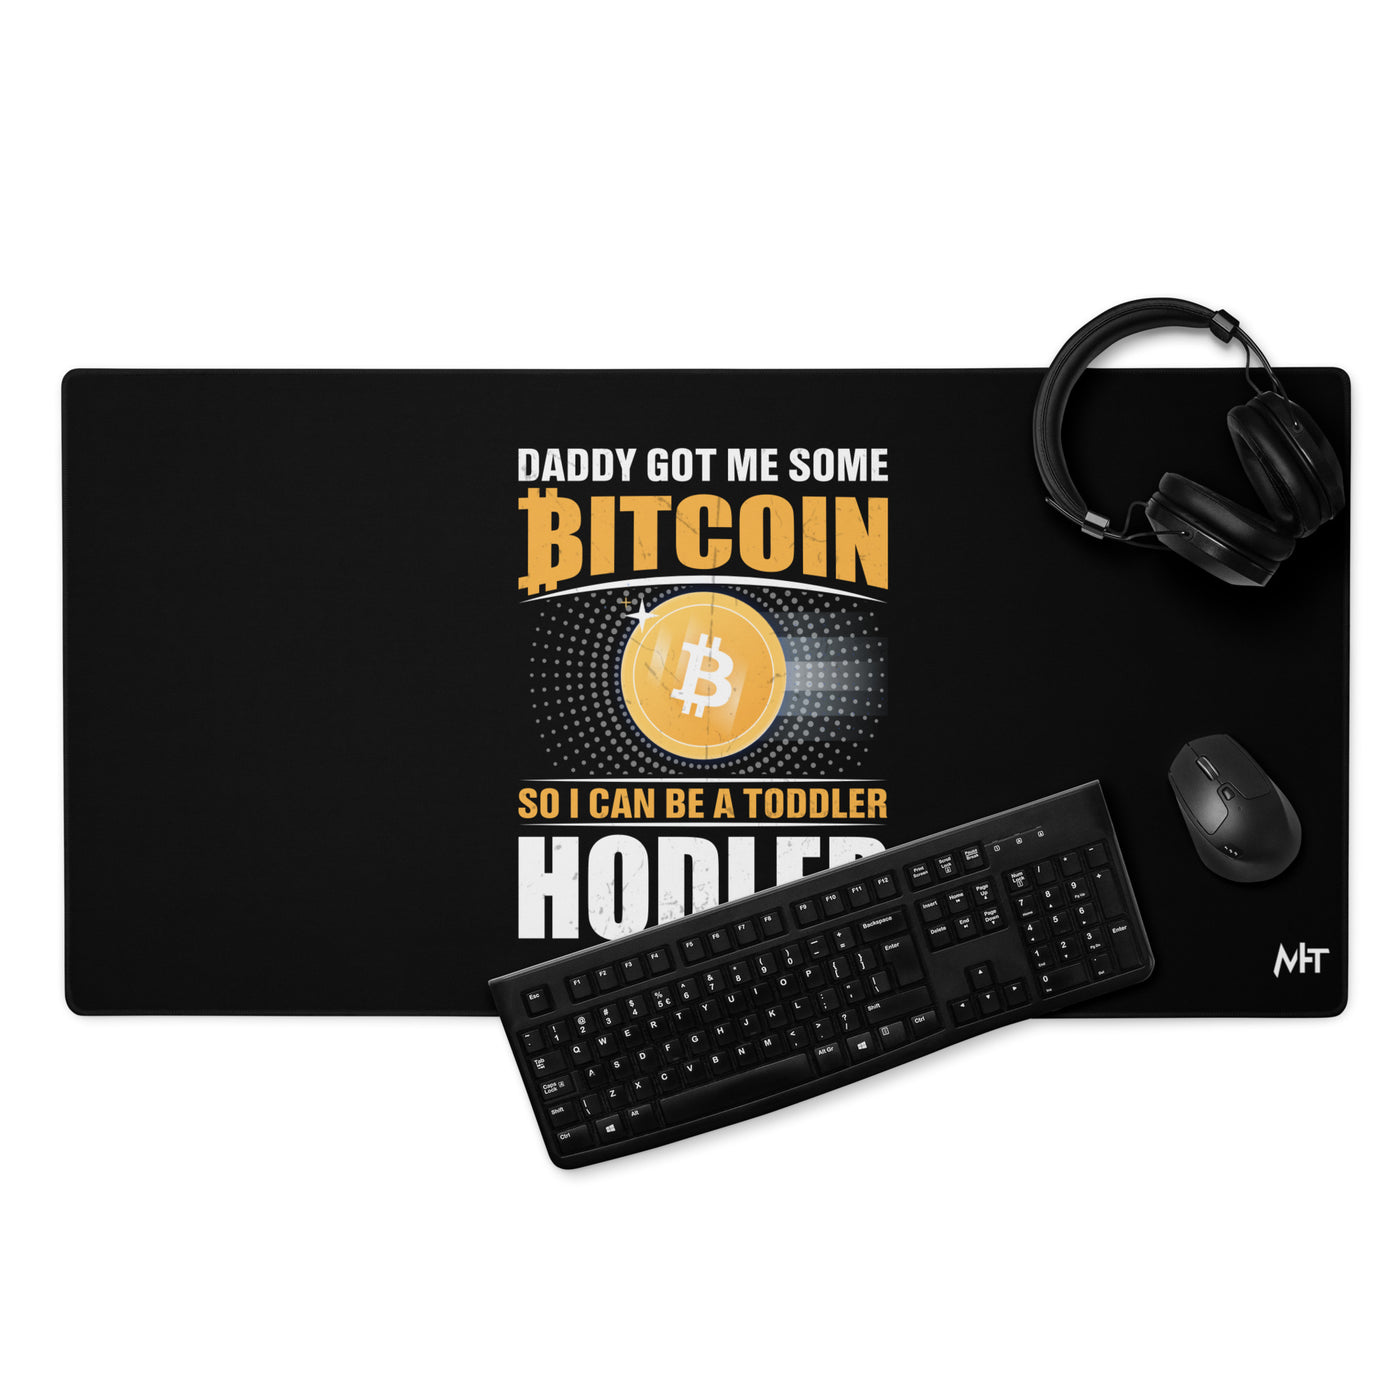 Daddy got me some Bitcoin, so I can be toddler holder - Desk Mat